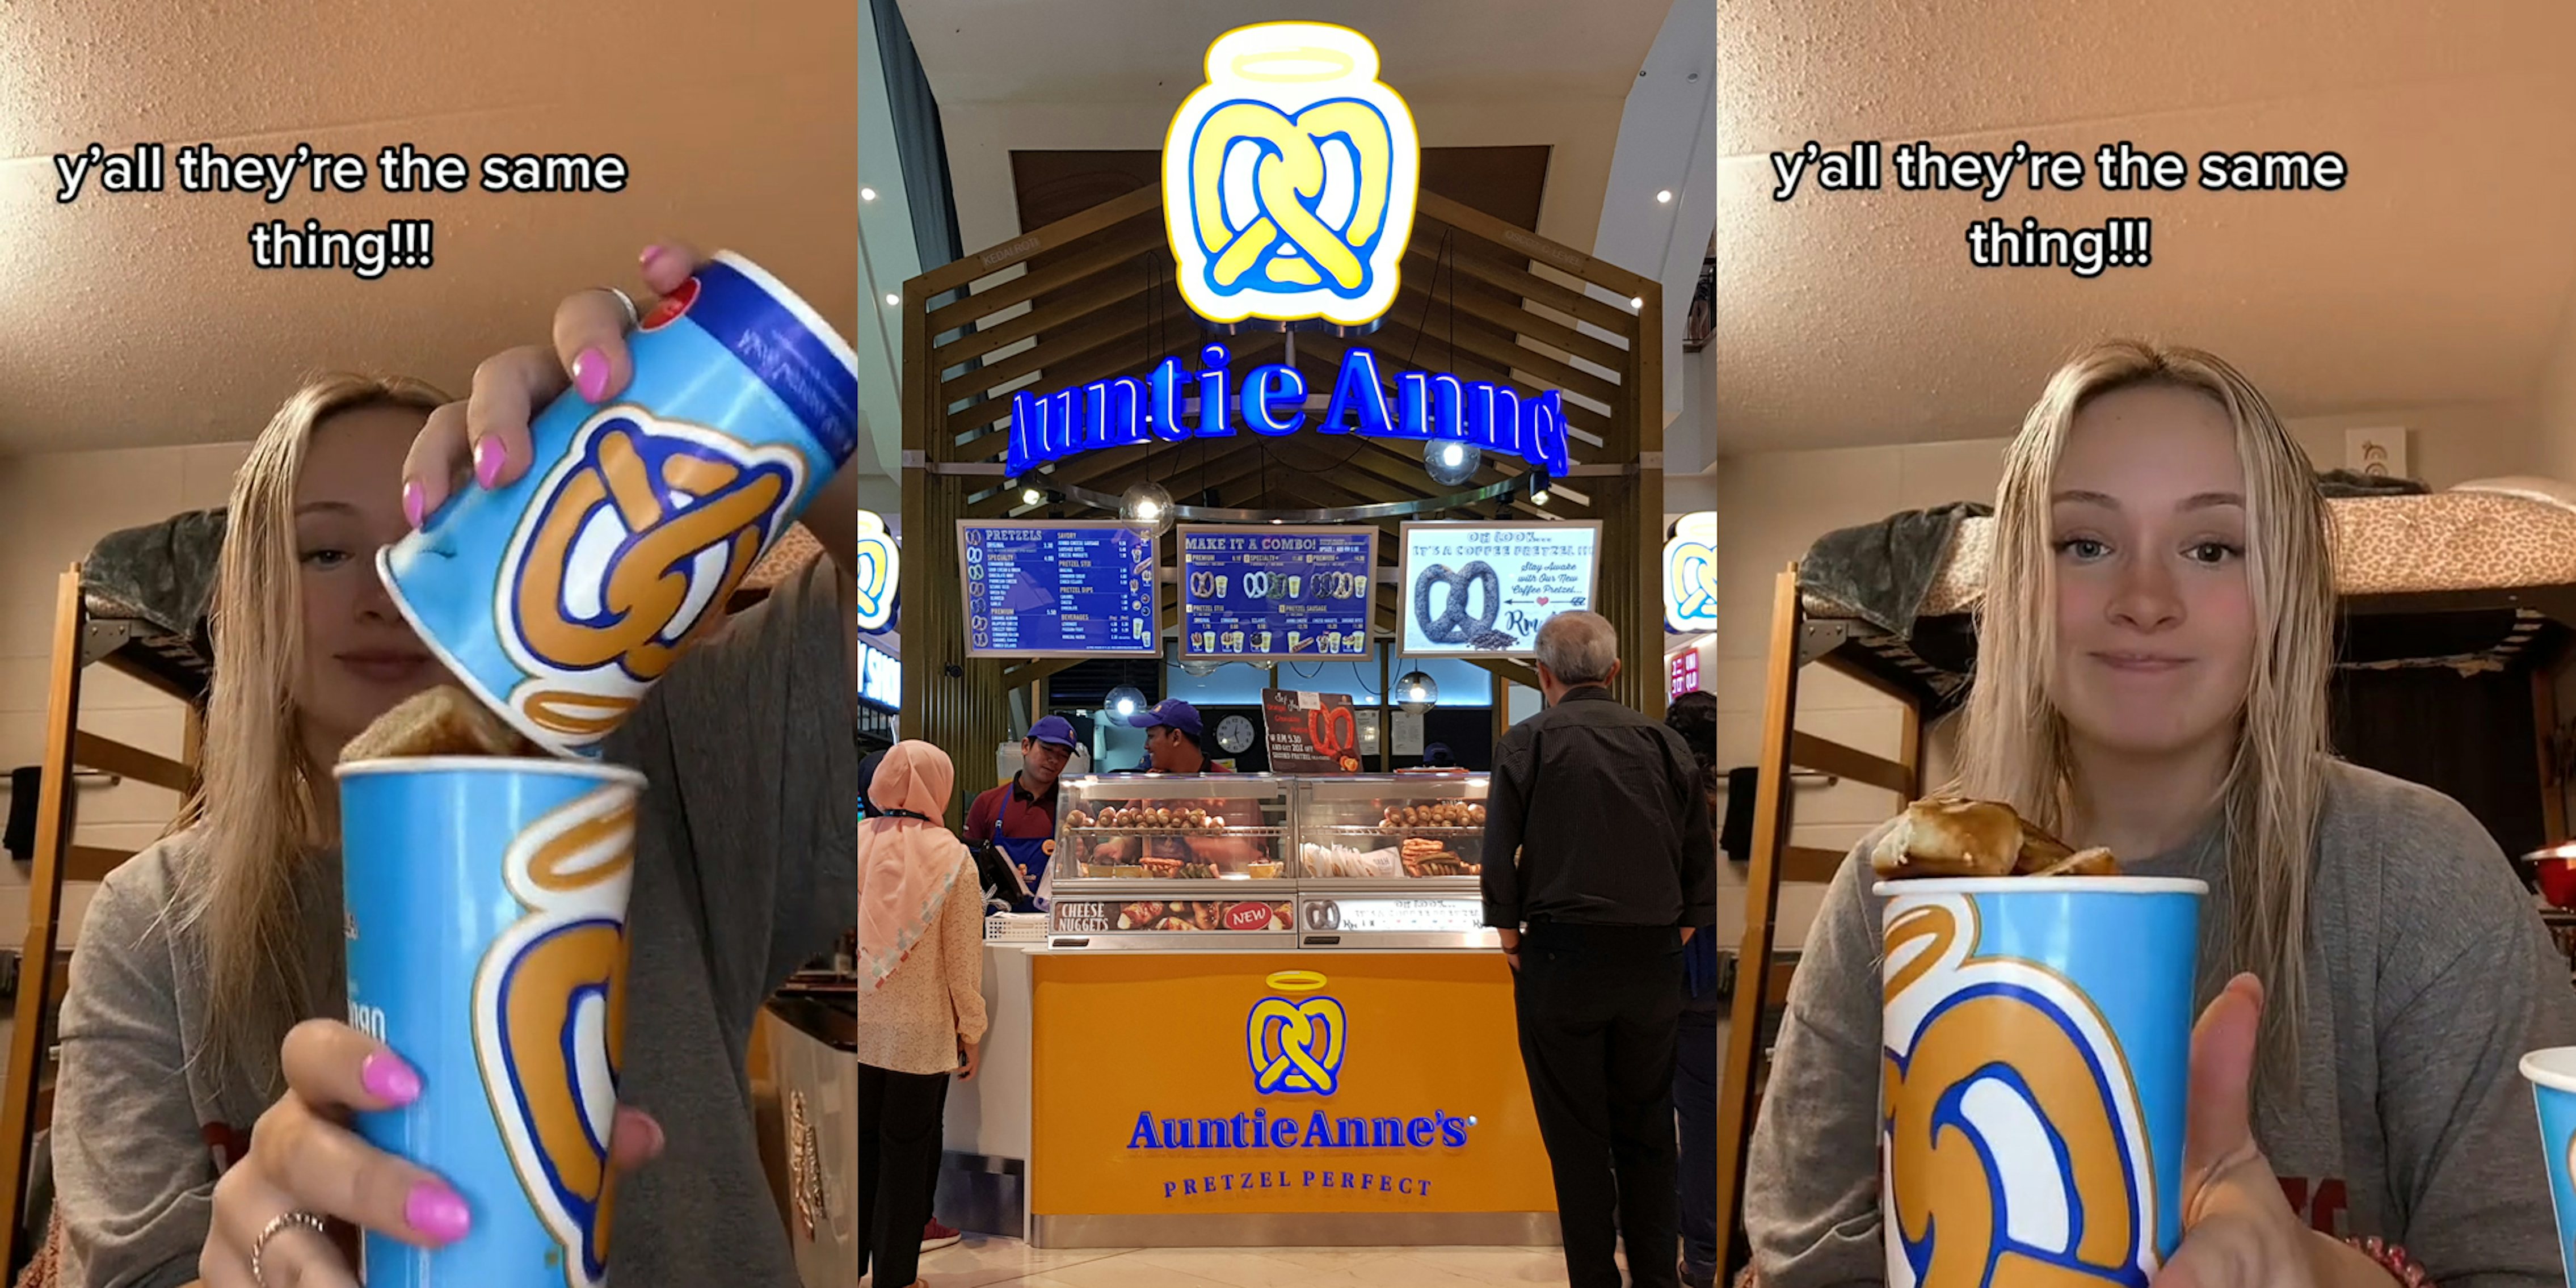 woman pouring smaller cup of Auntie Anne's pretzels into larger cup size caption 'y'all they're the same thing!!!' (l) Auntie Anne's stand in mall with sign (c) woman holding full Auntie Anne's cup of pretzels caption 'y'all they're the same thing!!!' (r)